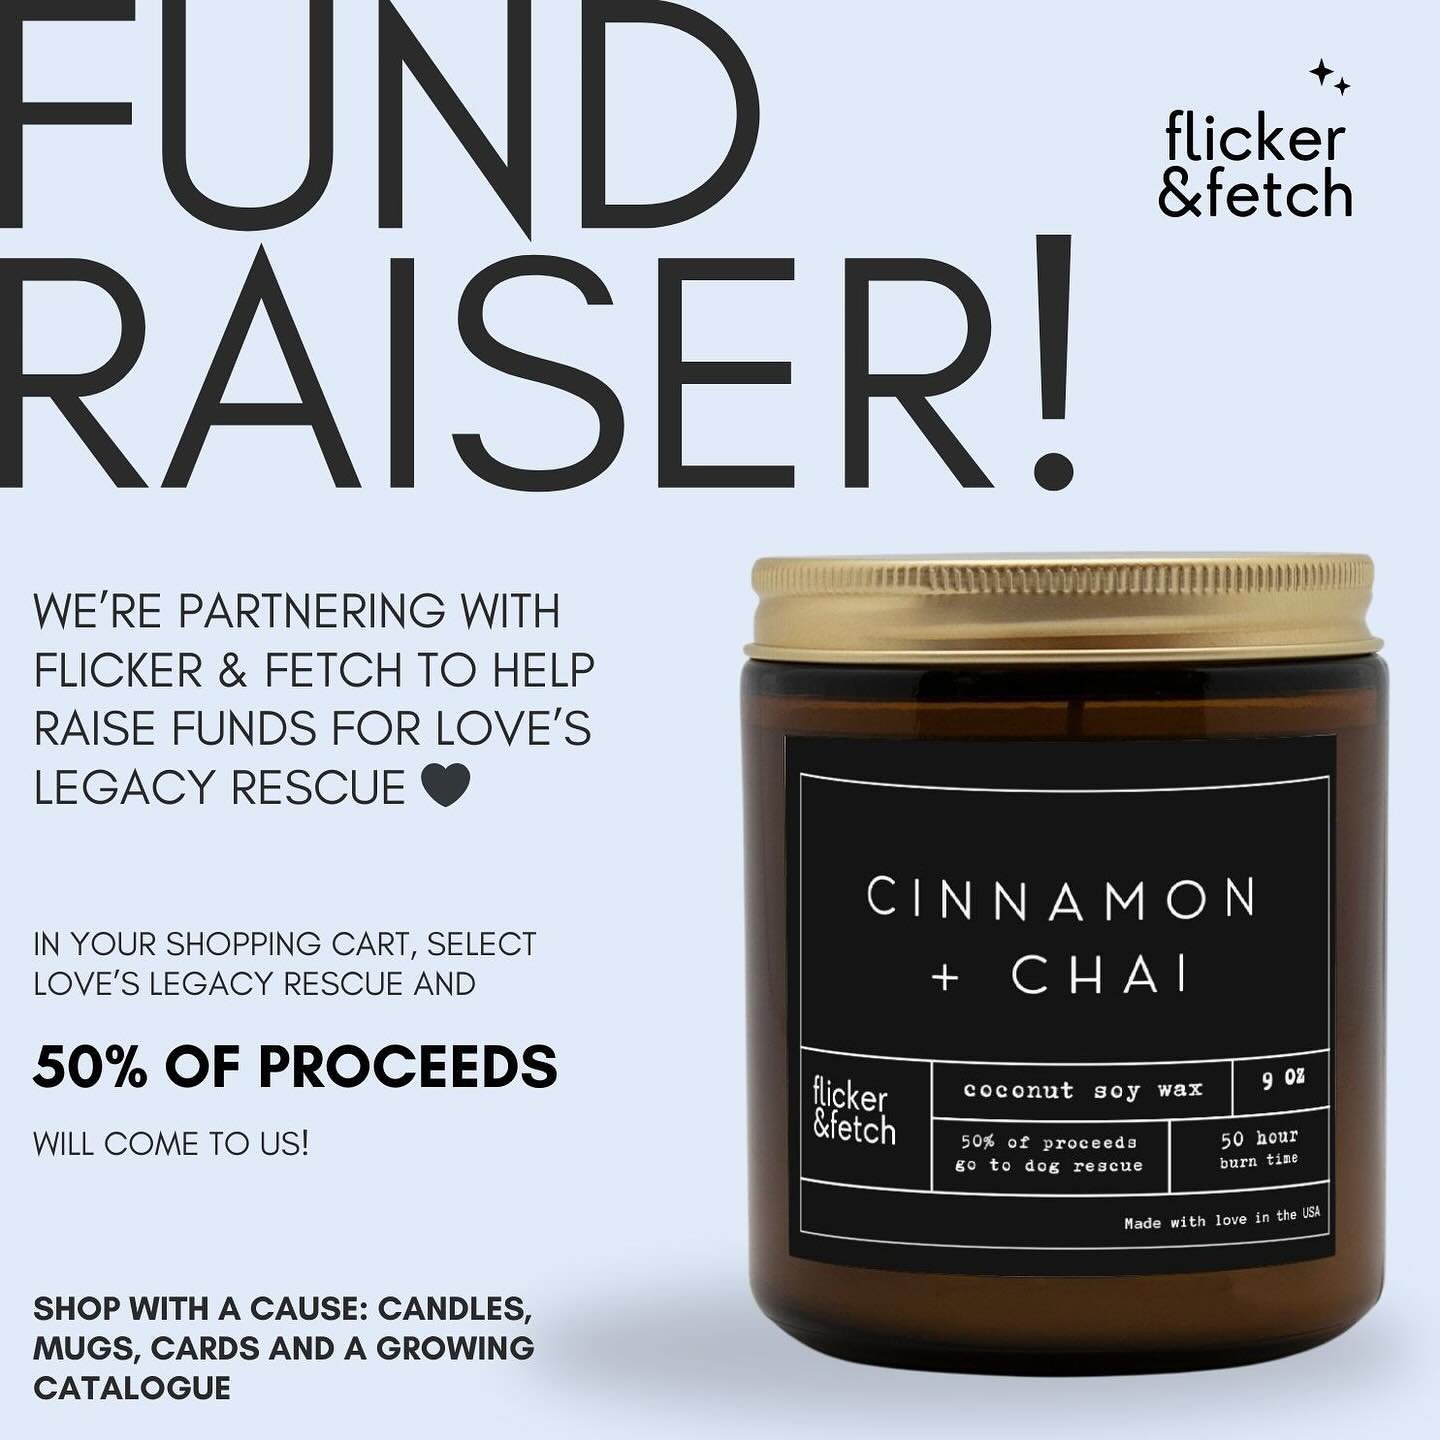 We are and partnering with @flickerandfetch to raise money for Loves Legacy Rescue! They have generously offered to donate 50% of proceeds to us! All you have to do is follow the instructions on the last slide. Visit flickerandfetch.com to start shop